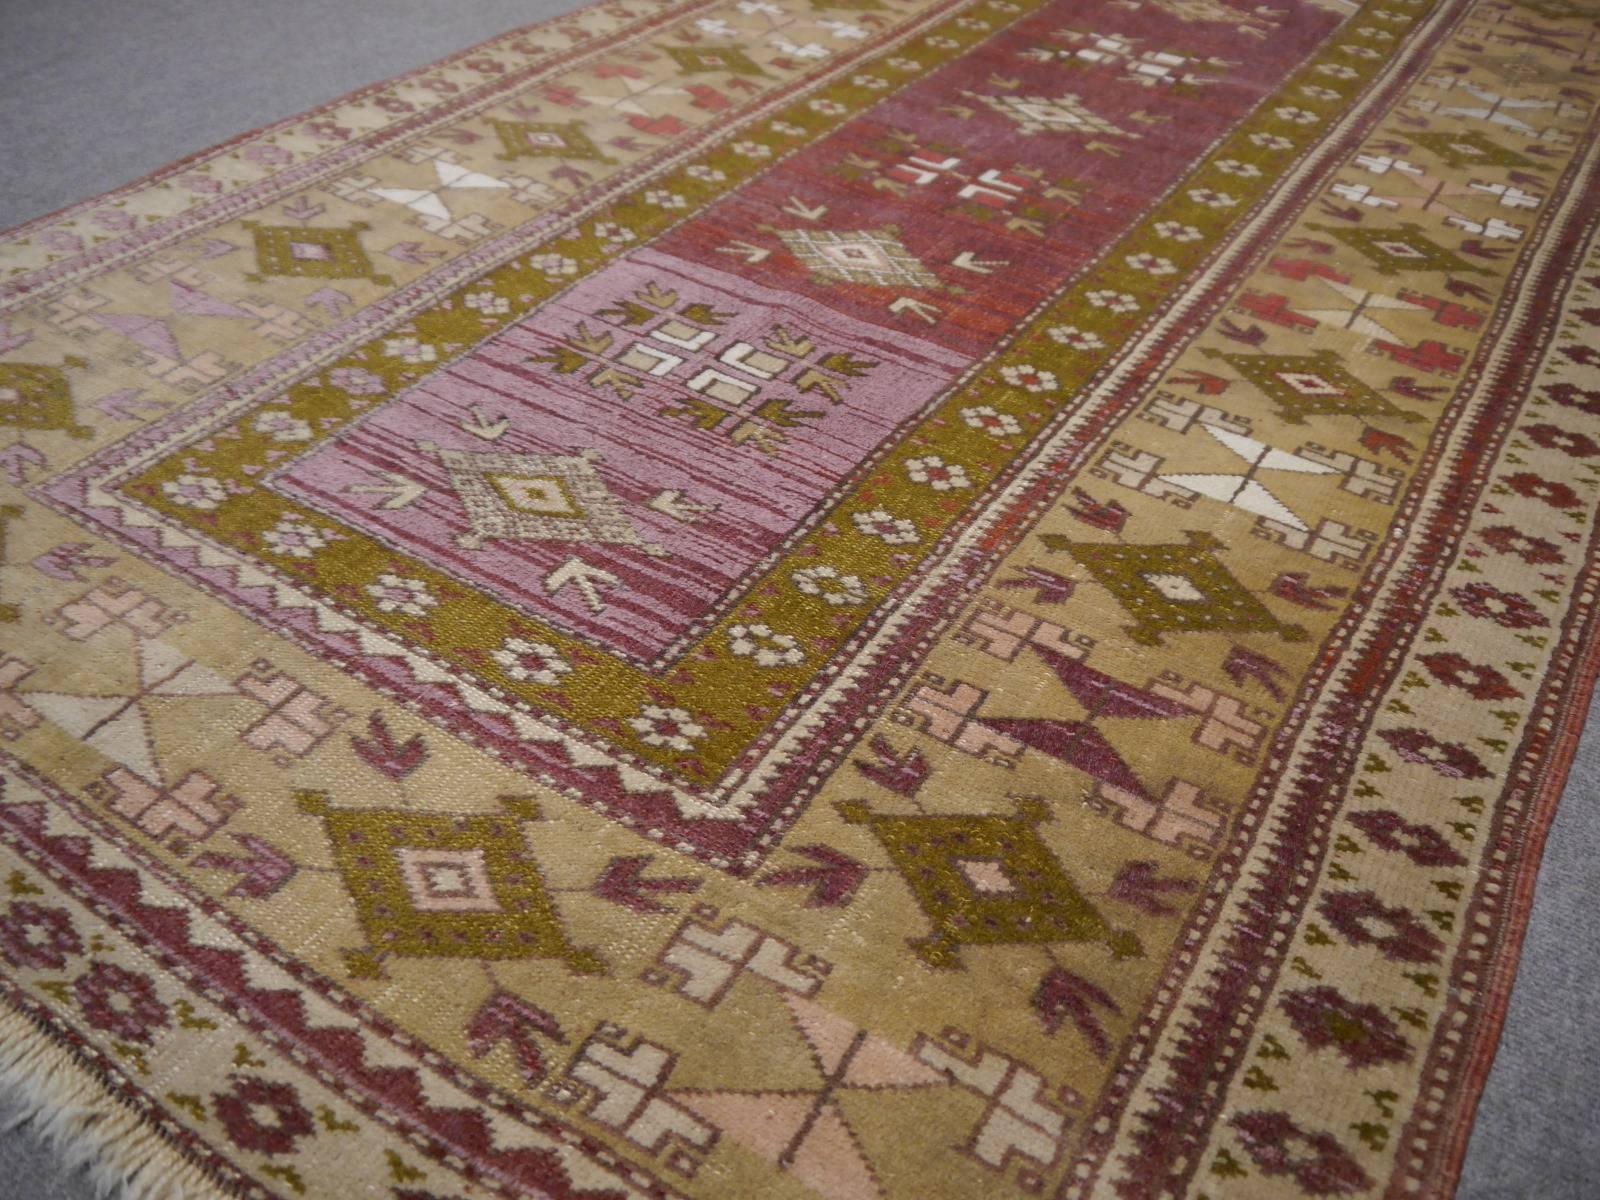 Hand-knotted Turkish Melas rug with unusual colors. 
This beautiful vintage rug was hand knotted by women in the village of Melas in the western antatolian district in Turkey. It is a traditional runner size with a prayer rug design. It has very